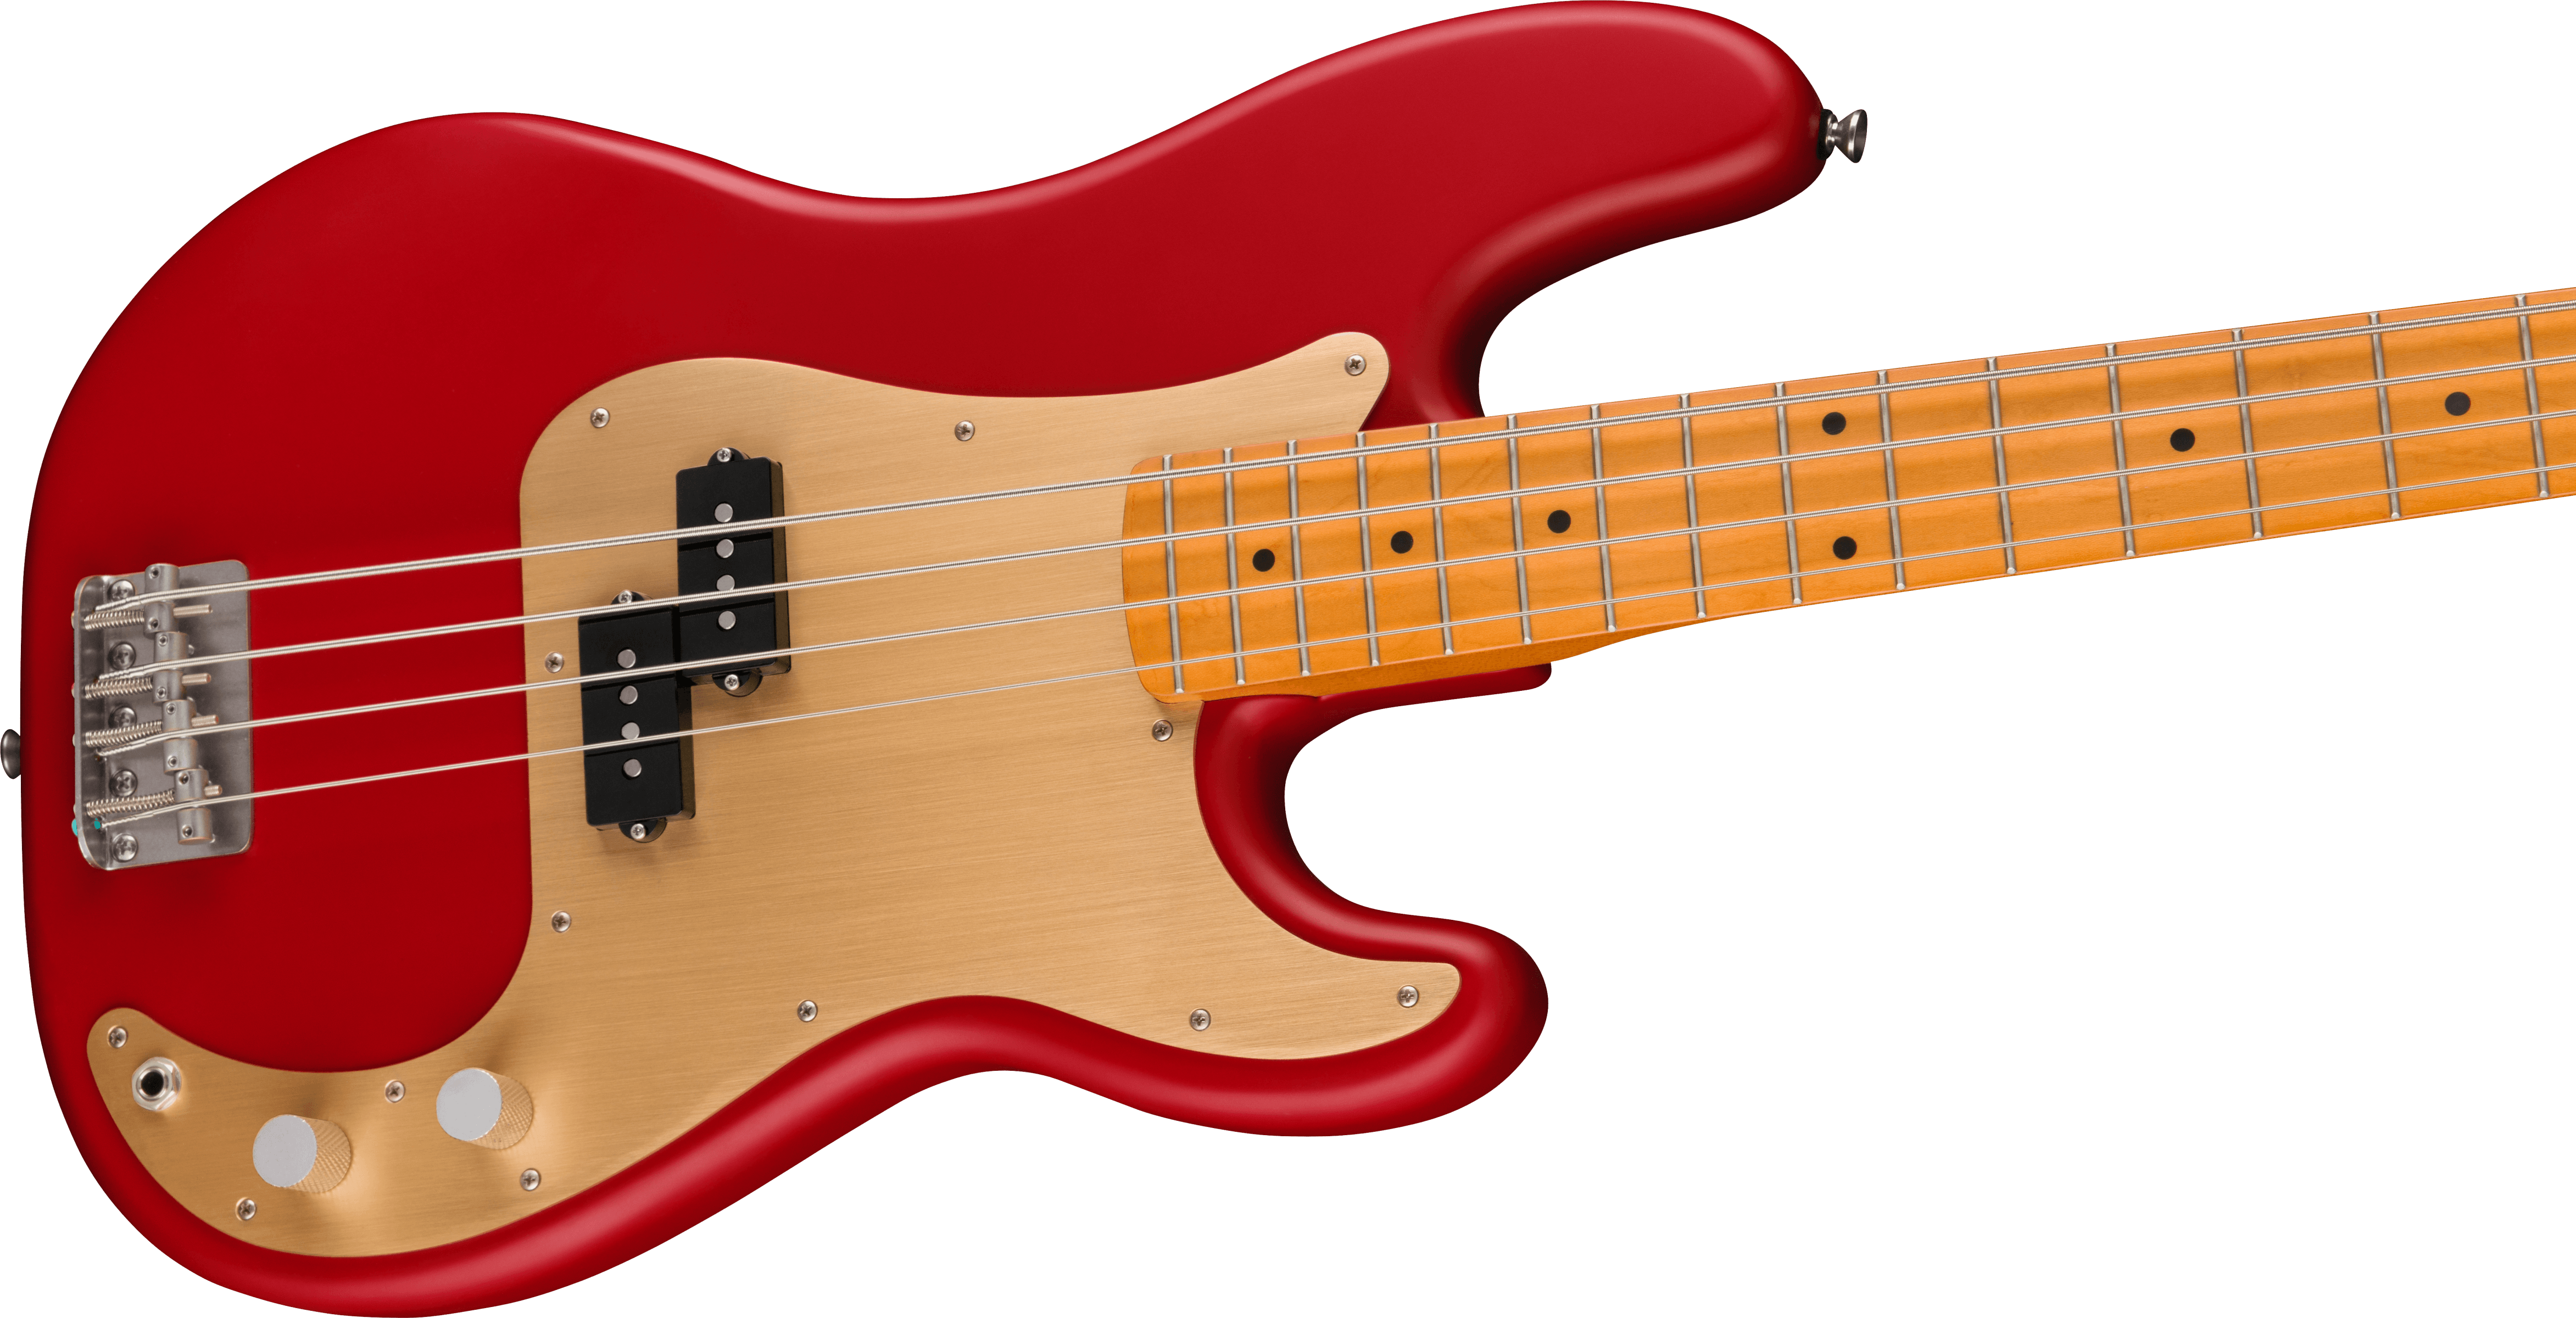 Squier Precision Bass 40th Anniversary Gold Edition Mn - Satin Dakota Red - Solid body electric bass - Variation 3